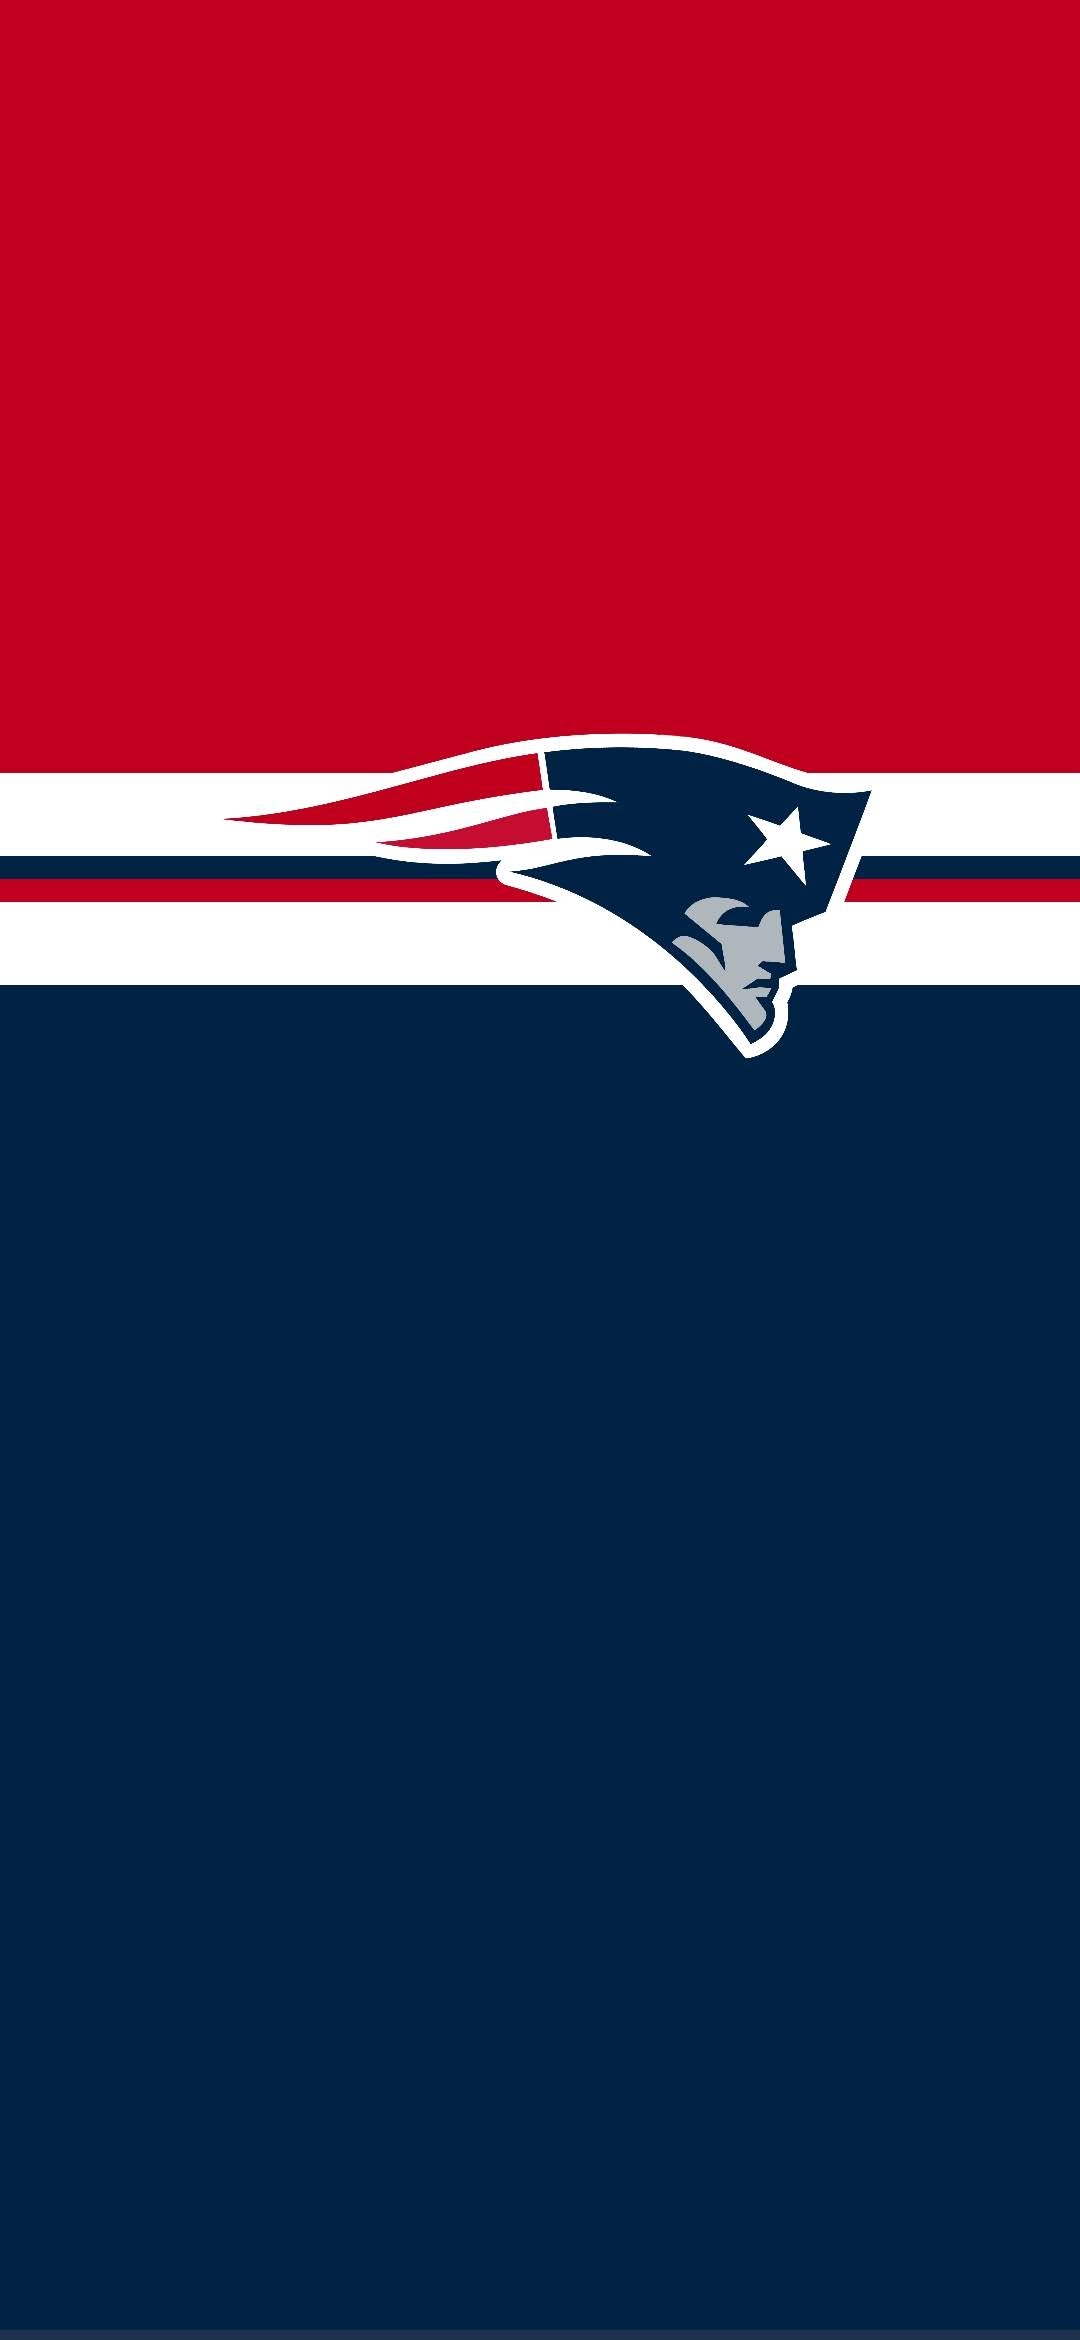 2019 Patriots, Top free, Backgrounds, NFL football, 1080x2340 HD Handy